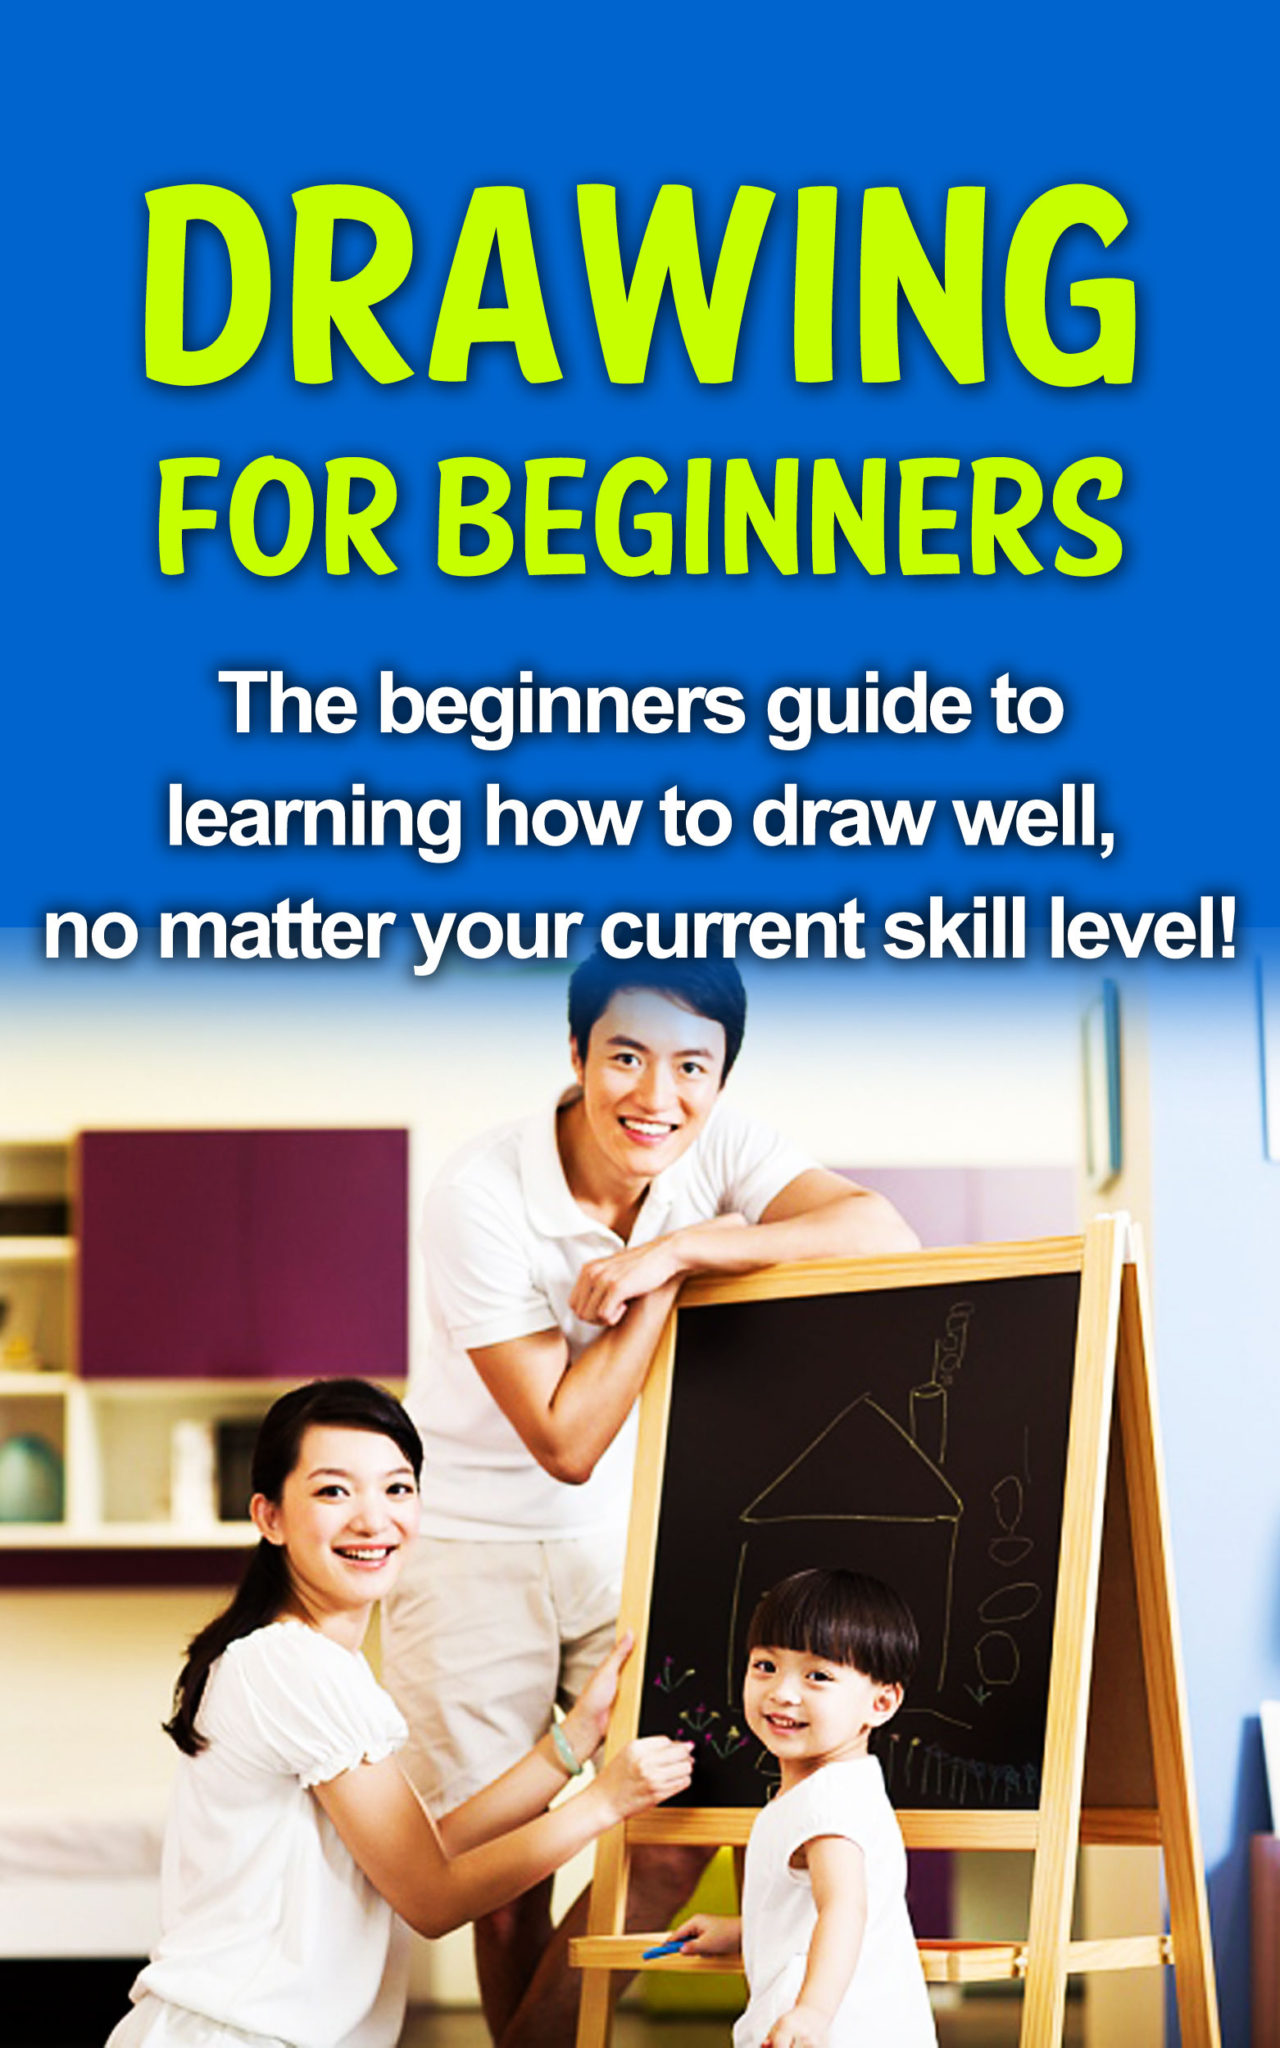 FREE: Drawing For Beginners: The beginners guide to learning how to draw well, no matter your current skill level! by Sean Selwood